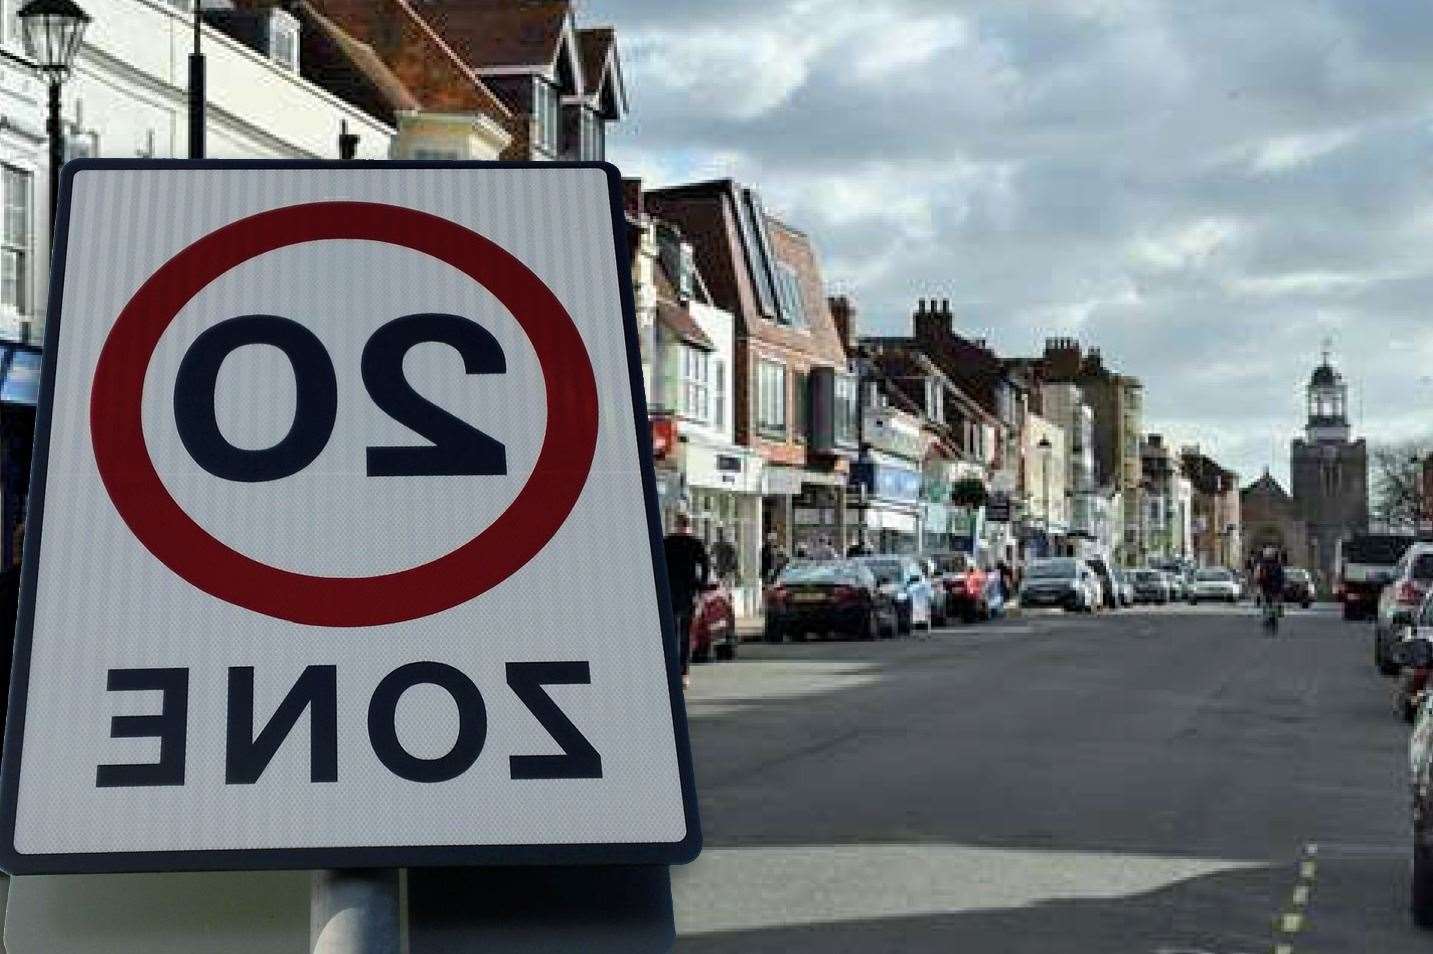 A 20mph speed limit ‘makes for a more peaceful urban environment’